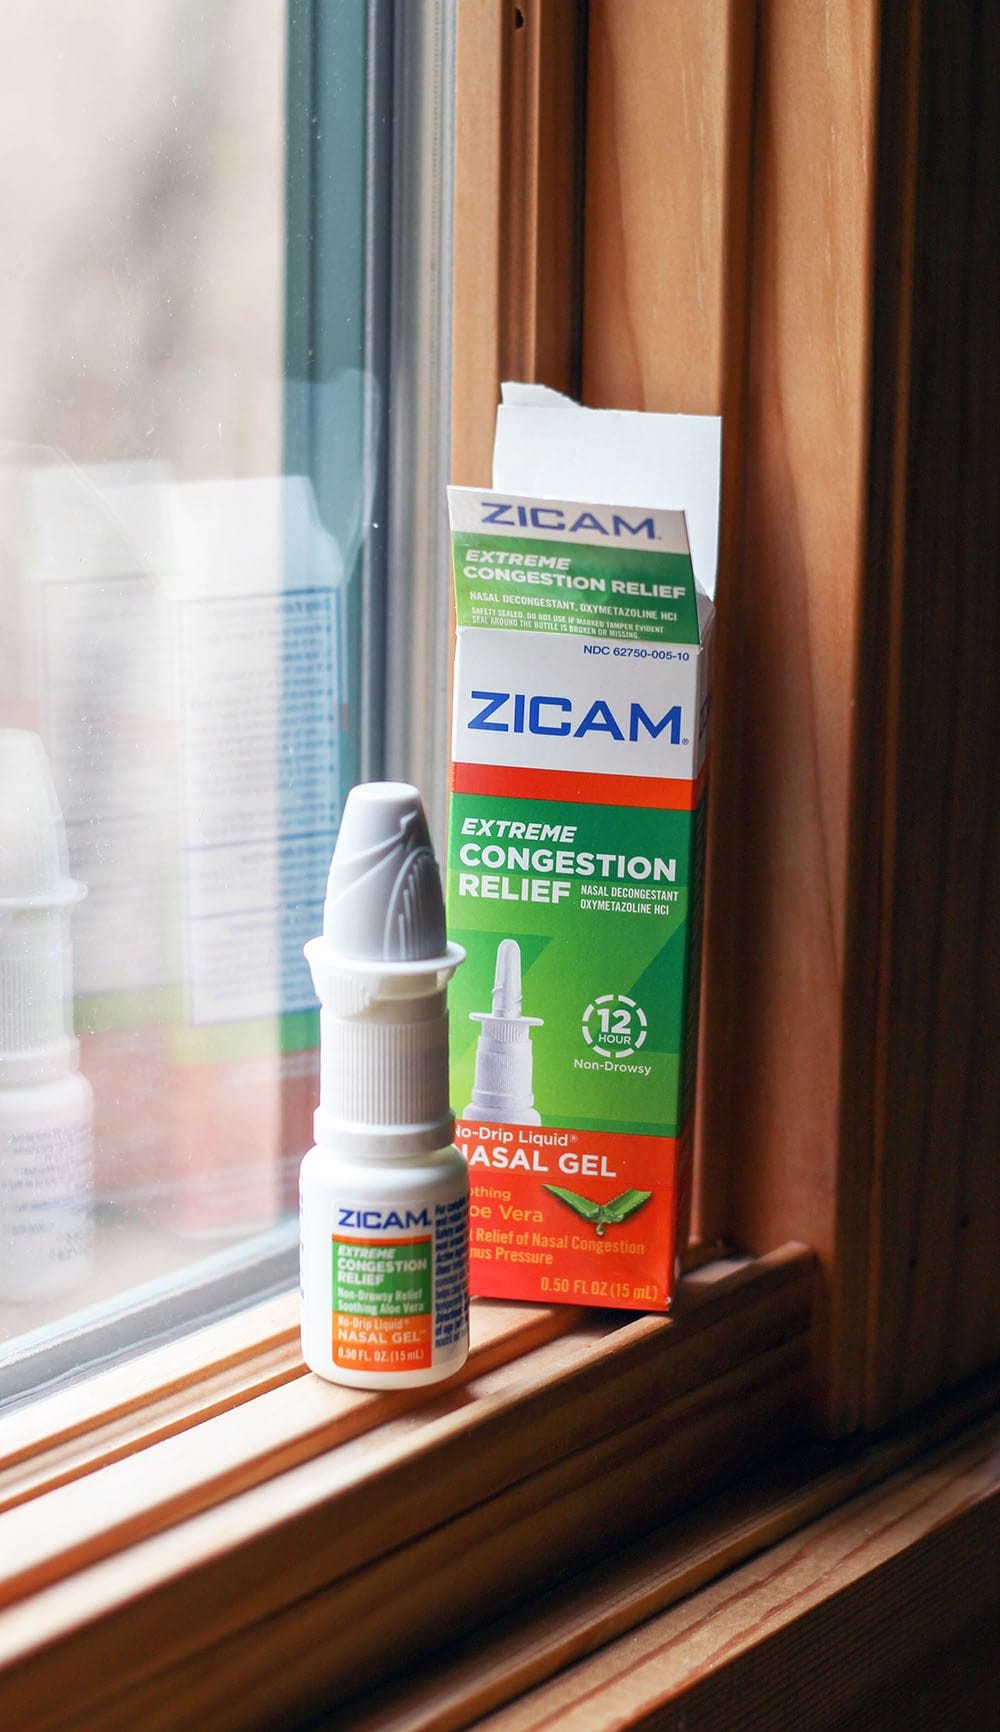 Zicam® Extreme Congestion Relief Spray is a No-Drip Liquid® Nasal Gel™ that helps knock out nasal congestion and sinus pressure due to colds or allergies.